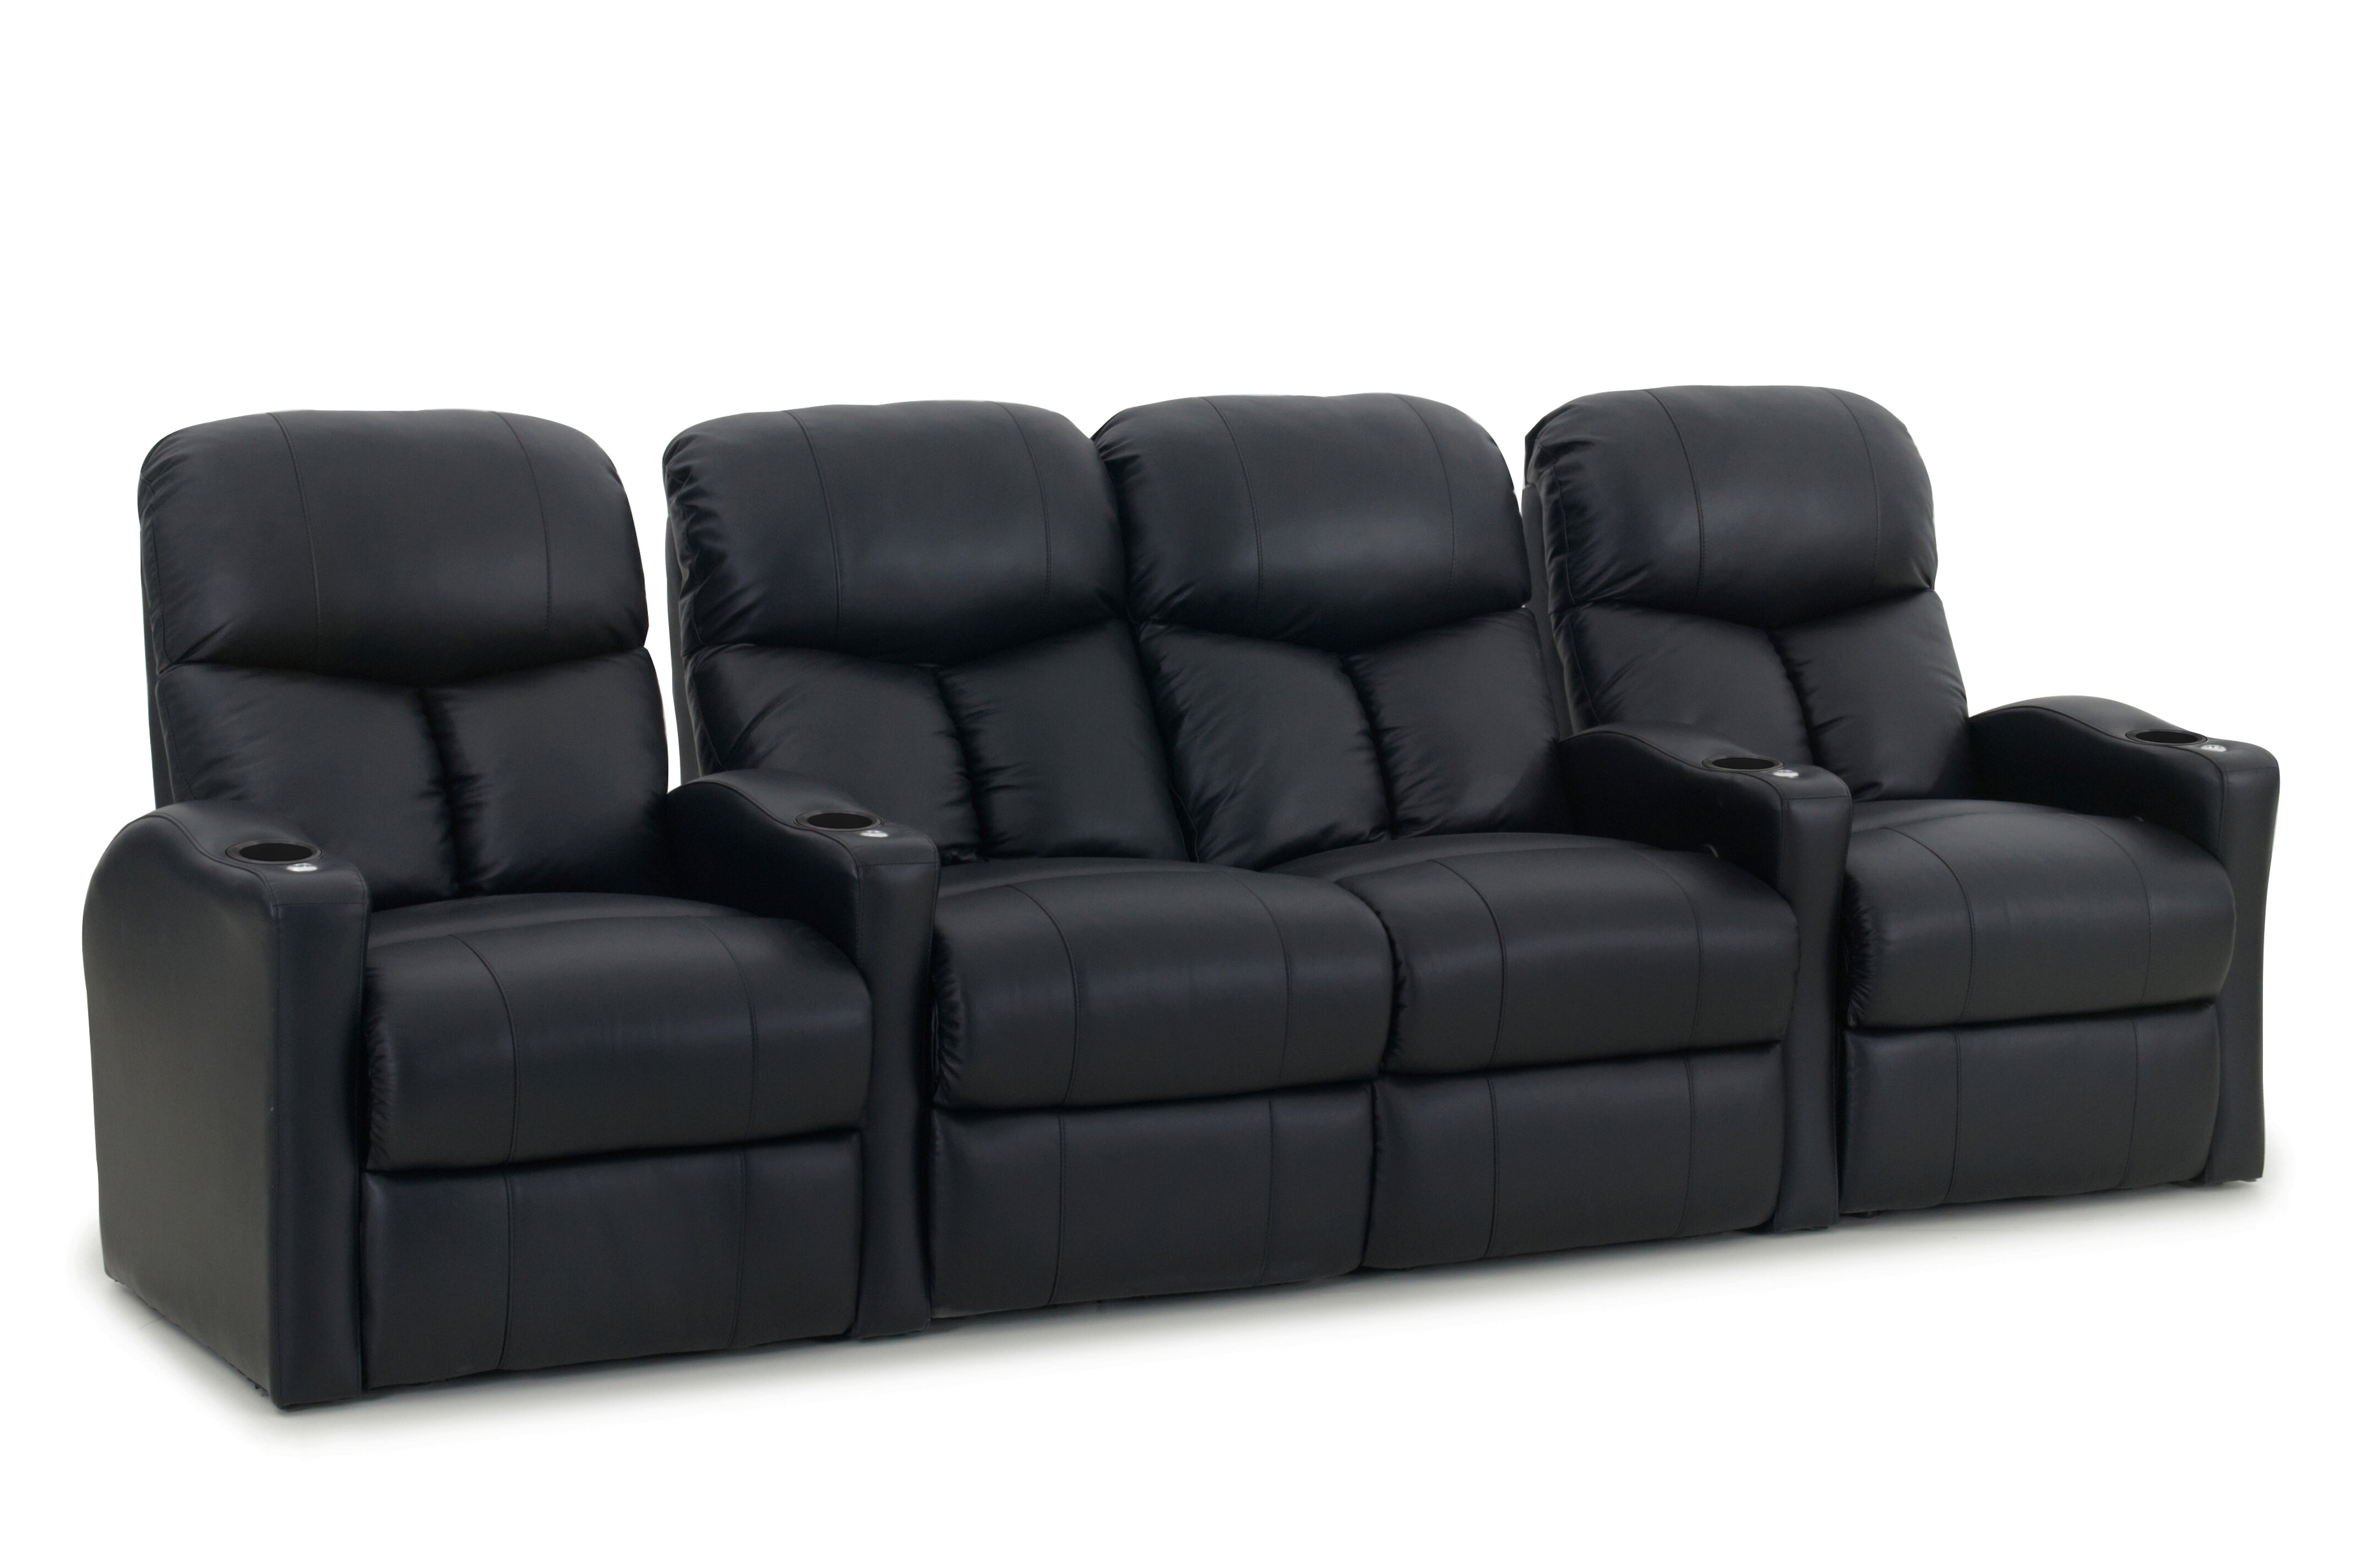 center loveseat home theater row seating row of 4